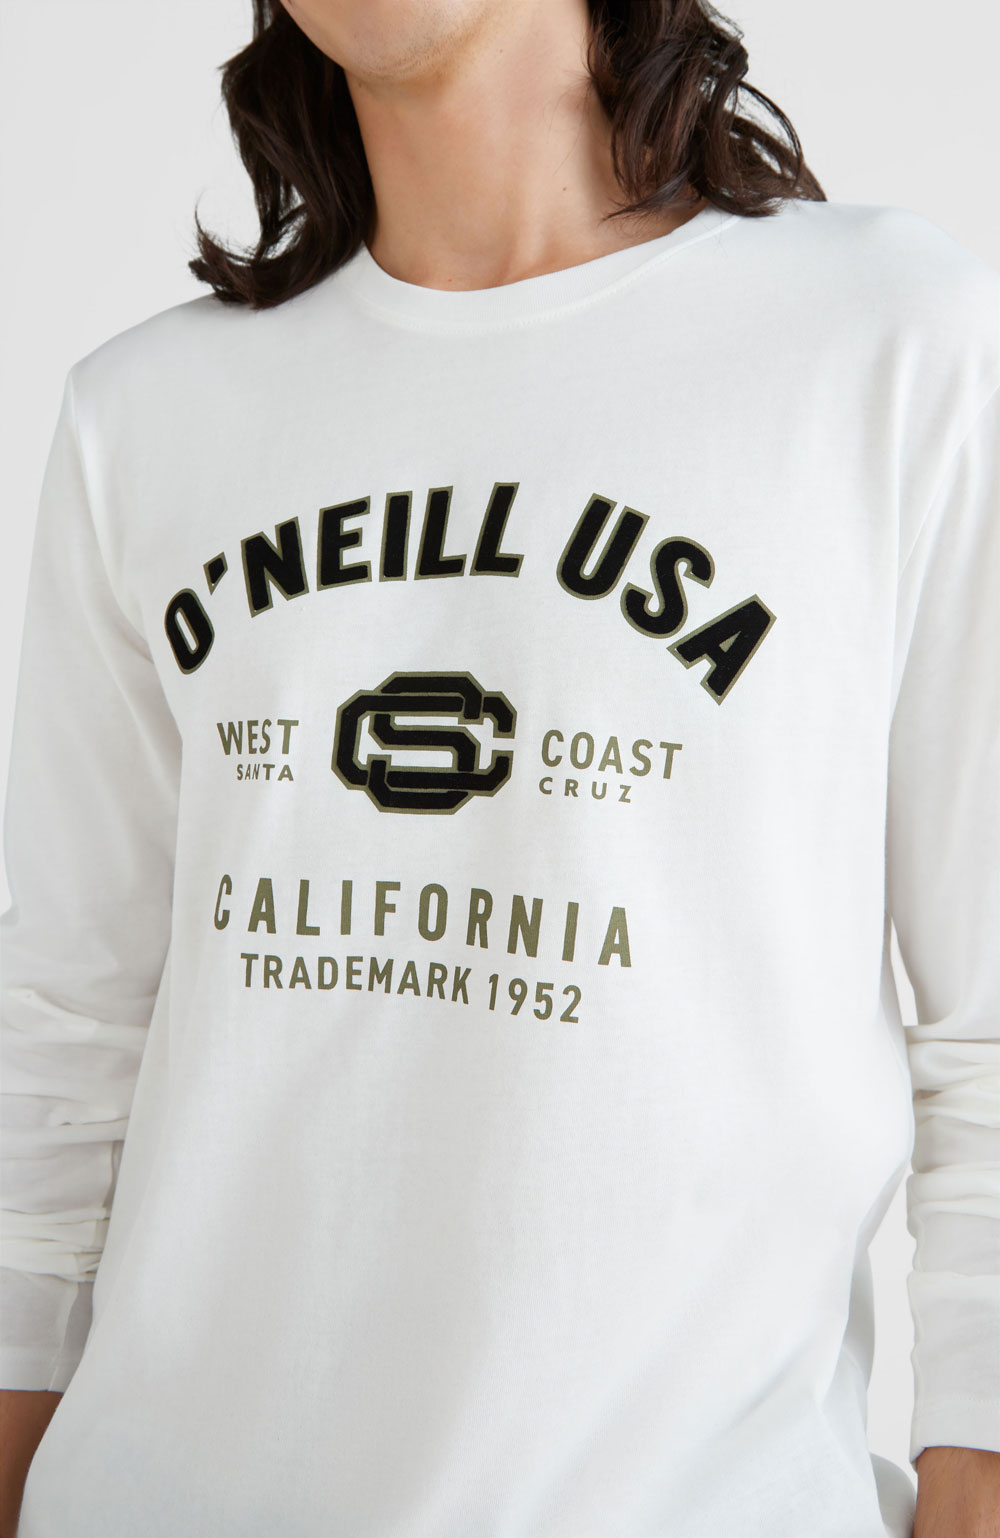 Men's top with long sleeves